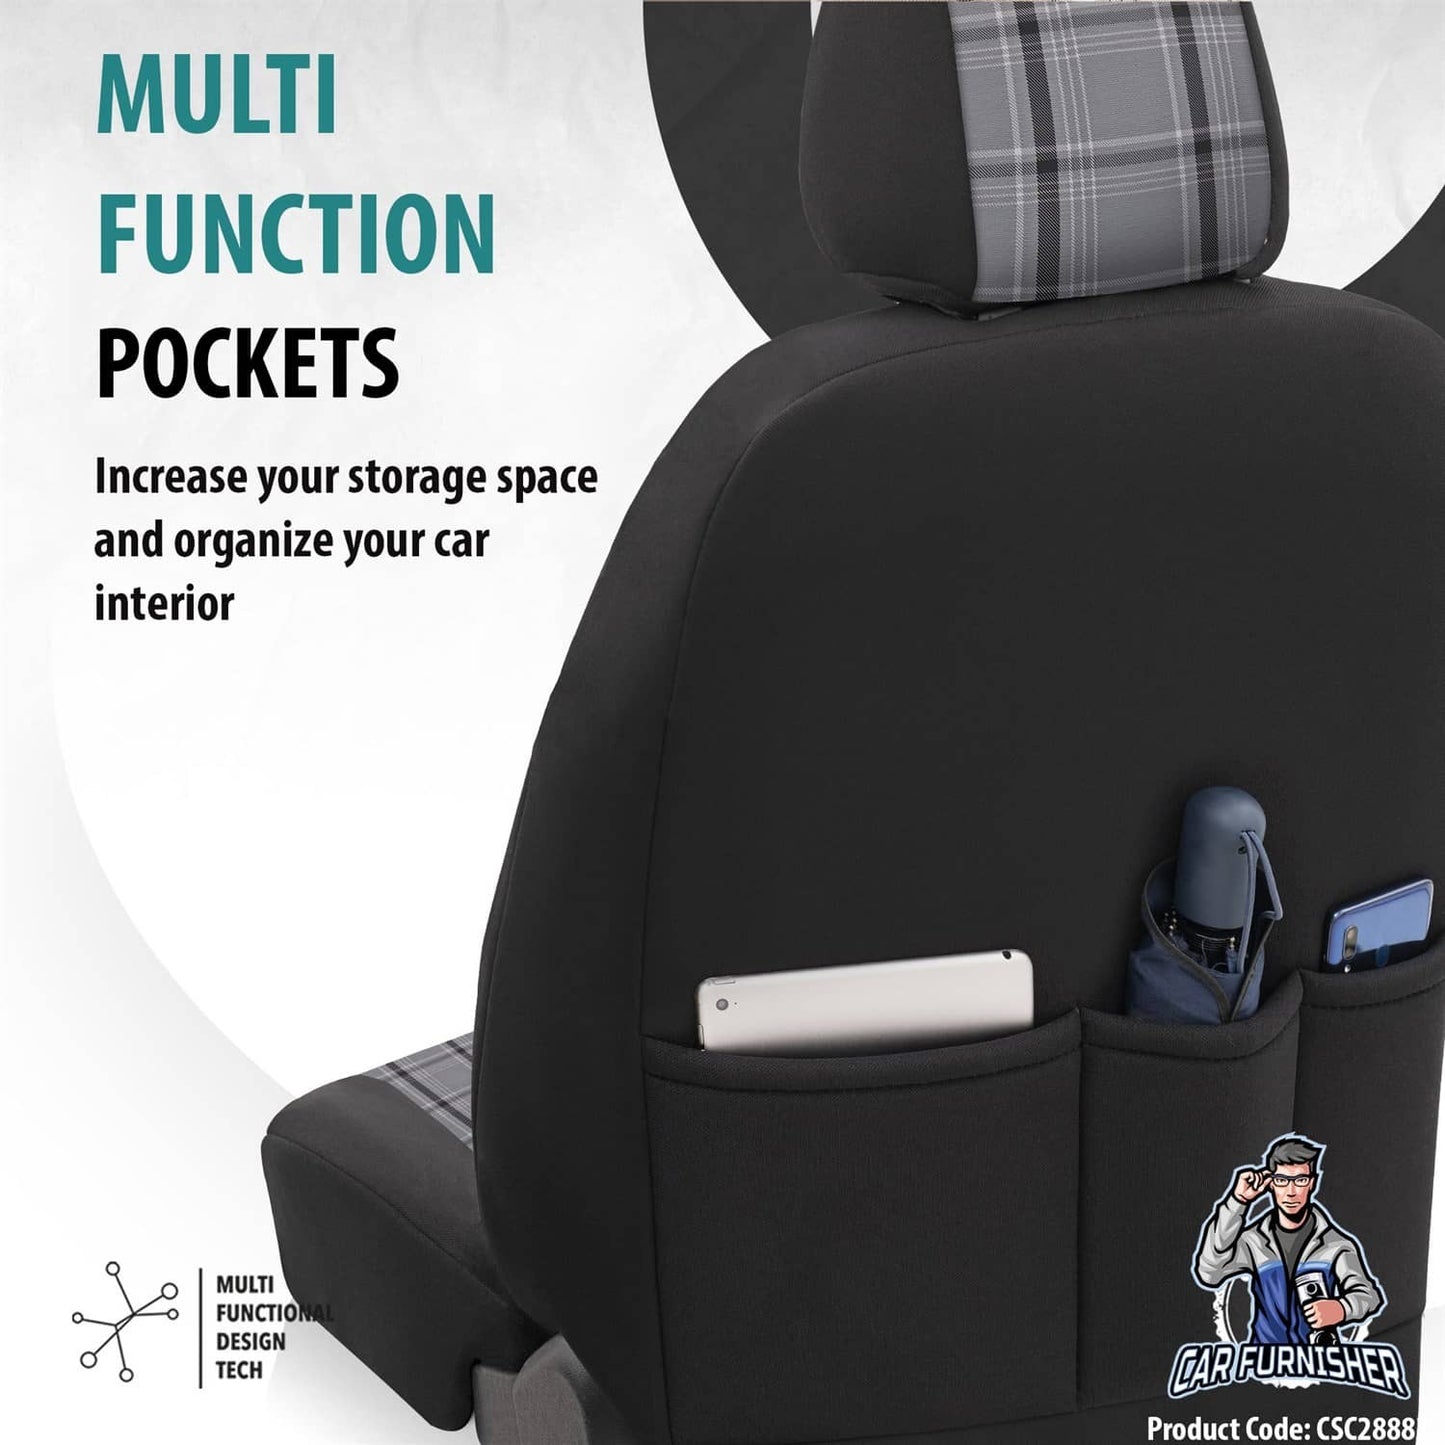 Car Seat Cover Set - Sports Design Silver 5 Seats + Headrests (Full Set) Leather & Jacquard Fabric